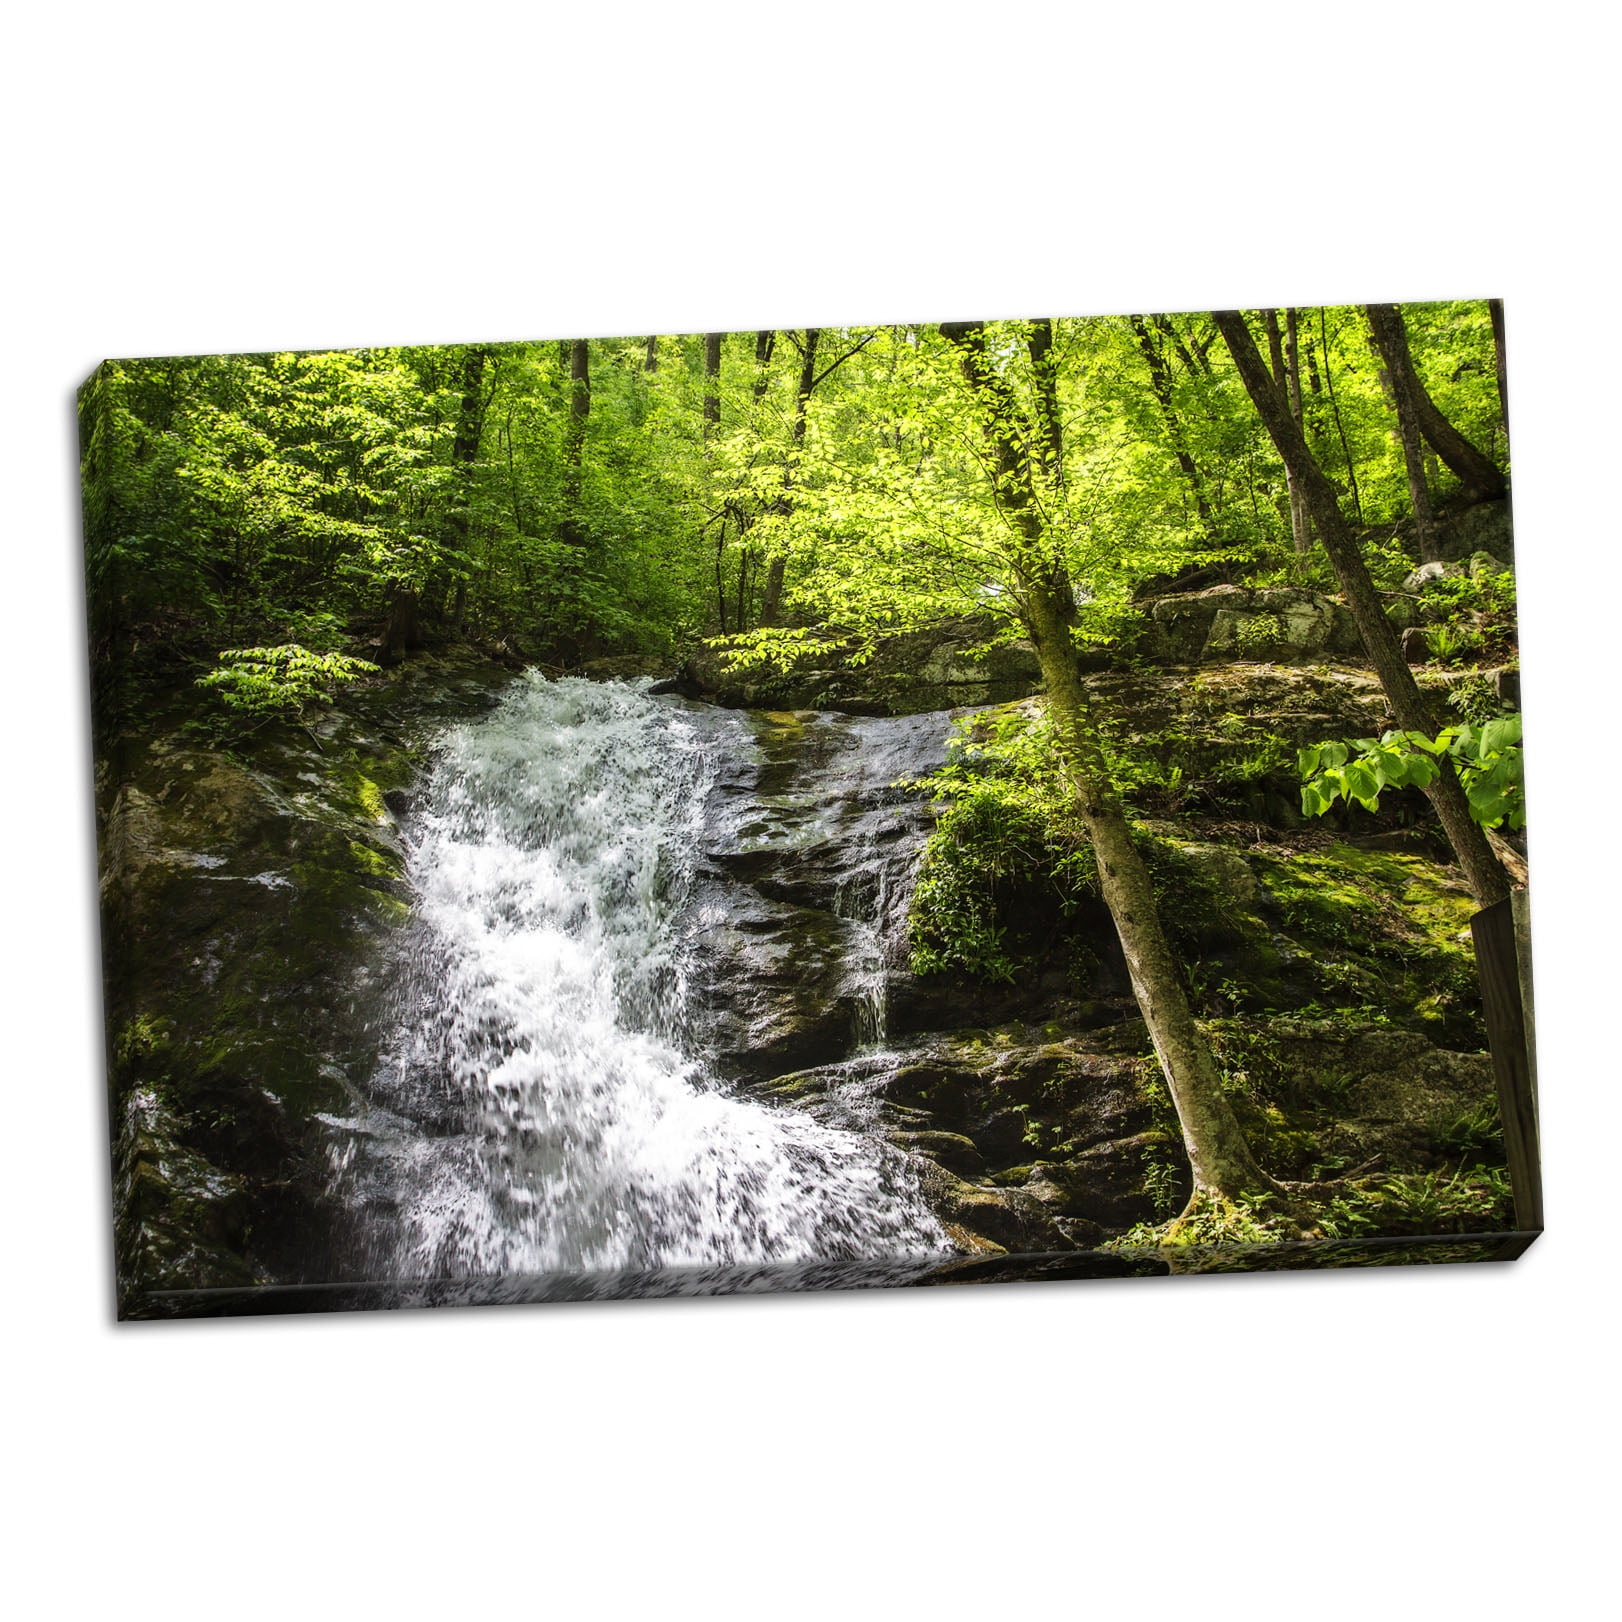 Frozen Waterfall Canvas Wall Art Picture Print 36x24in